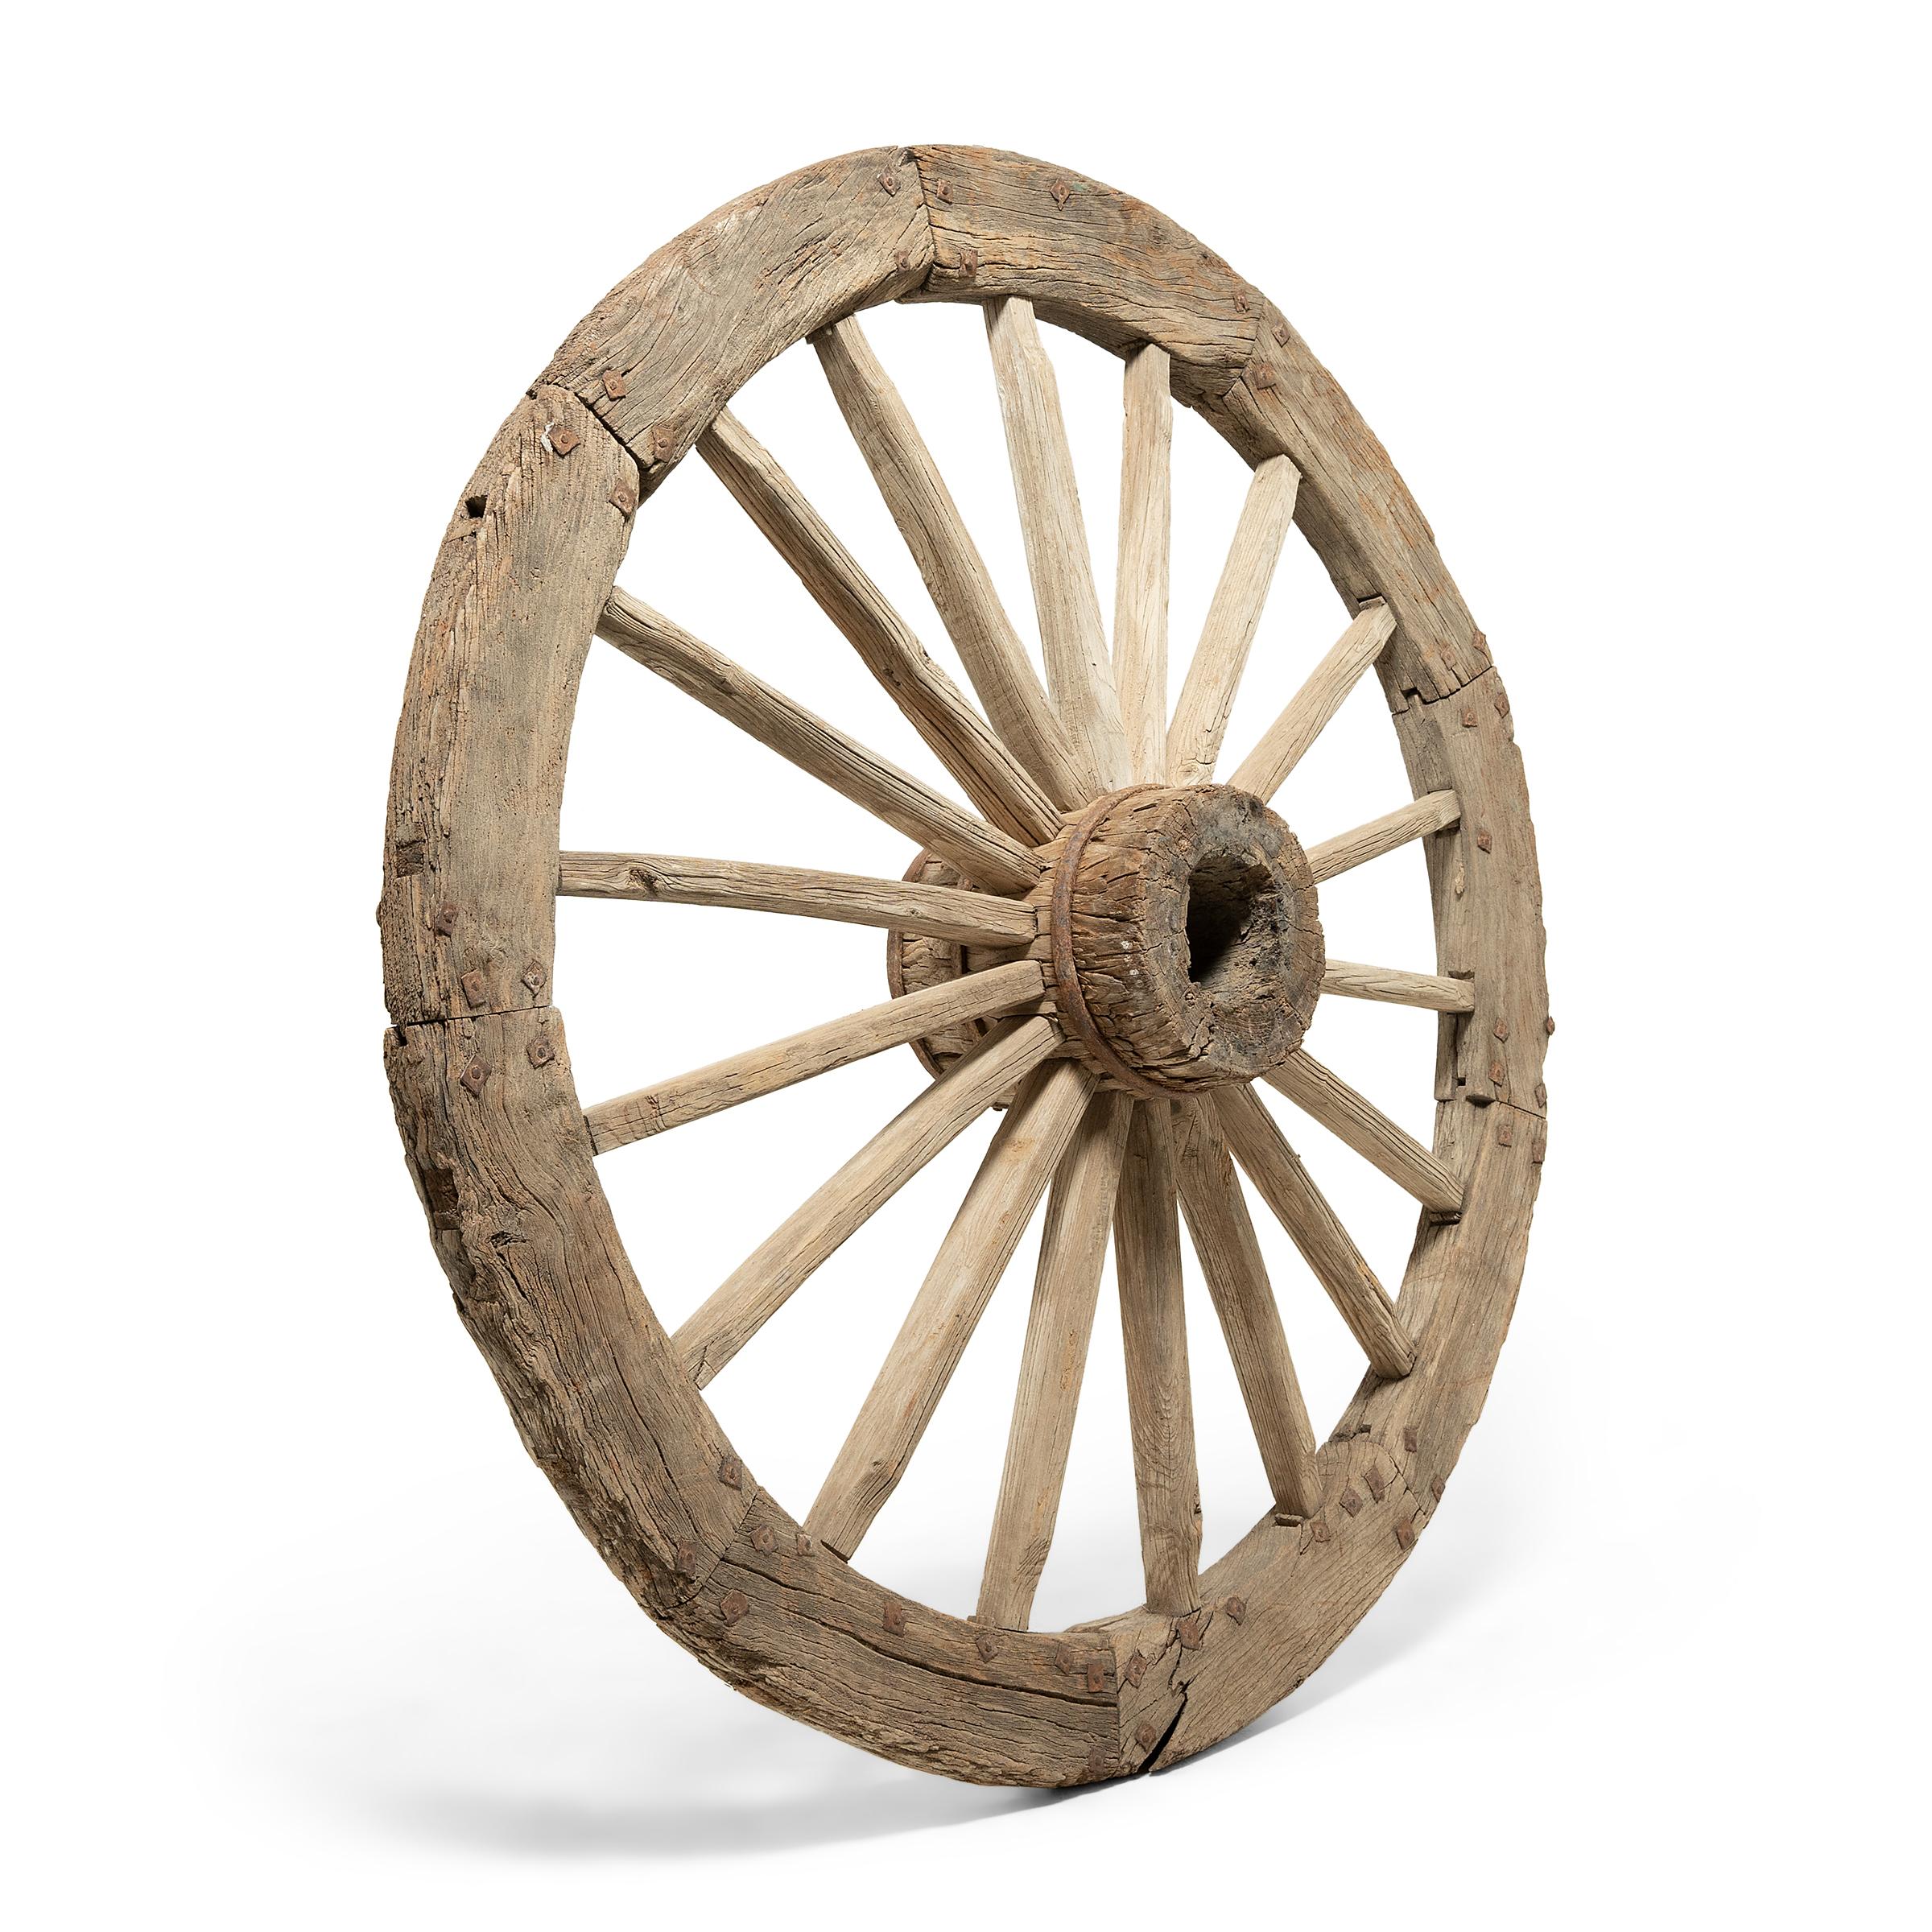 Hewn from pine and held together with handmade iron nails, this provincial wooden wheel is a remarkable example of turn-of-the-century craftsmanship. Its monumental scale suggests it was used not as a wagon wheel, but as a turning element of a